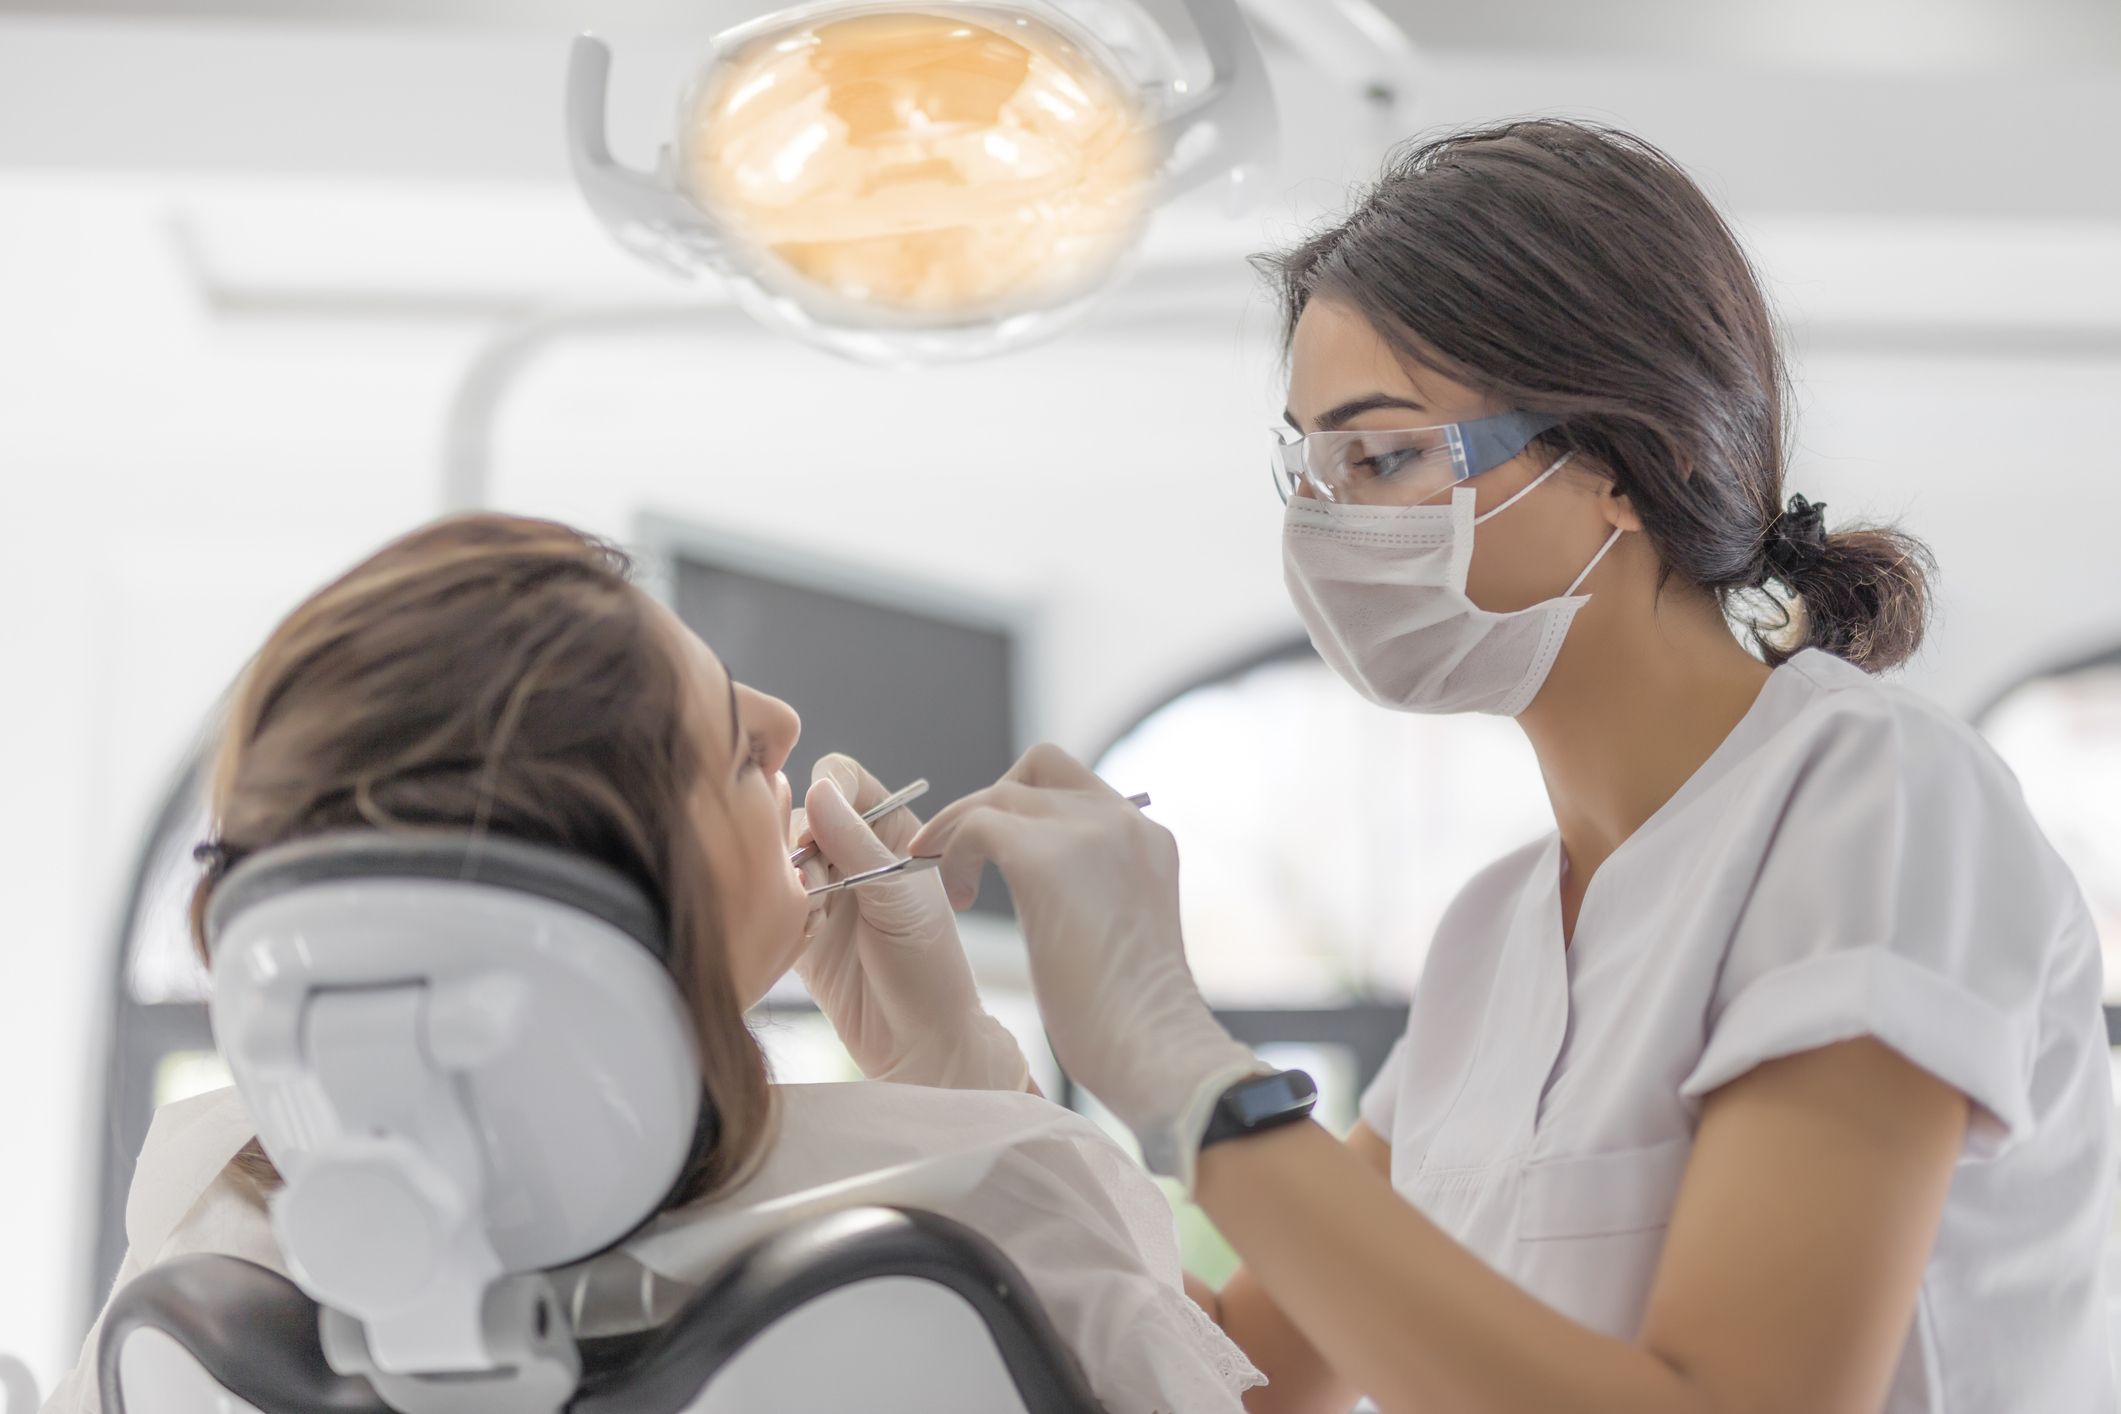 A dental hygienist is cleaning a patient&#x27;s teeth in a modern dental office. Both are wearing protective masks